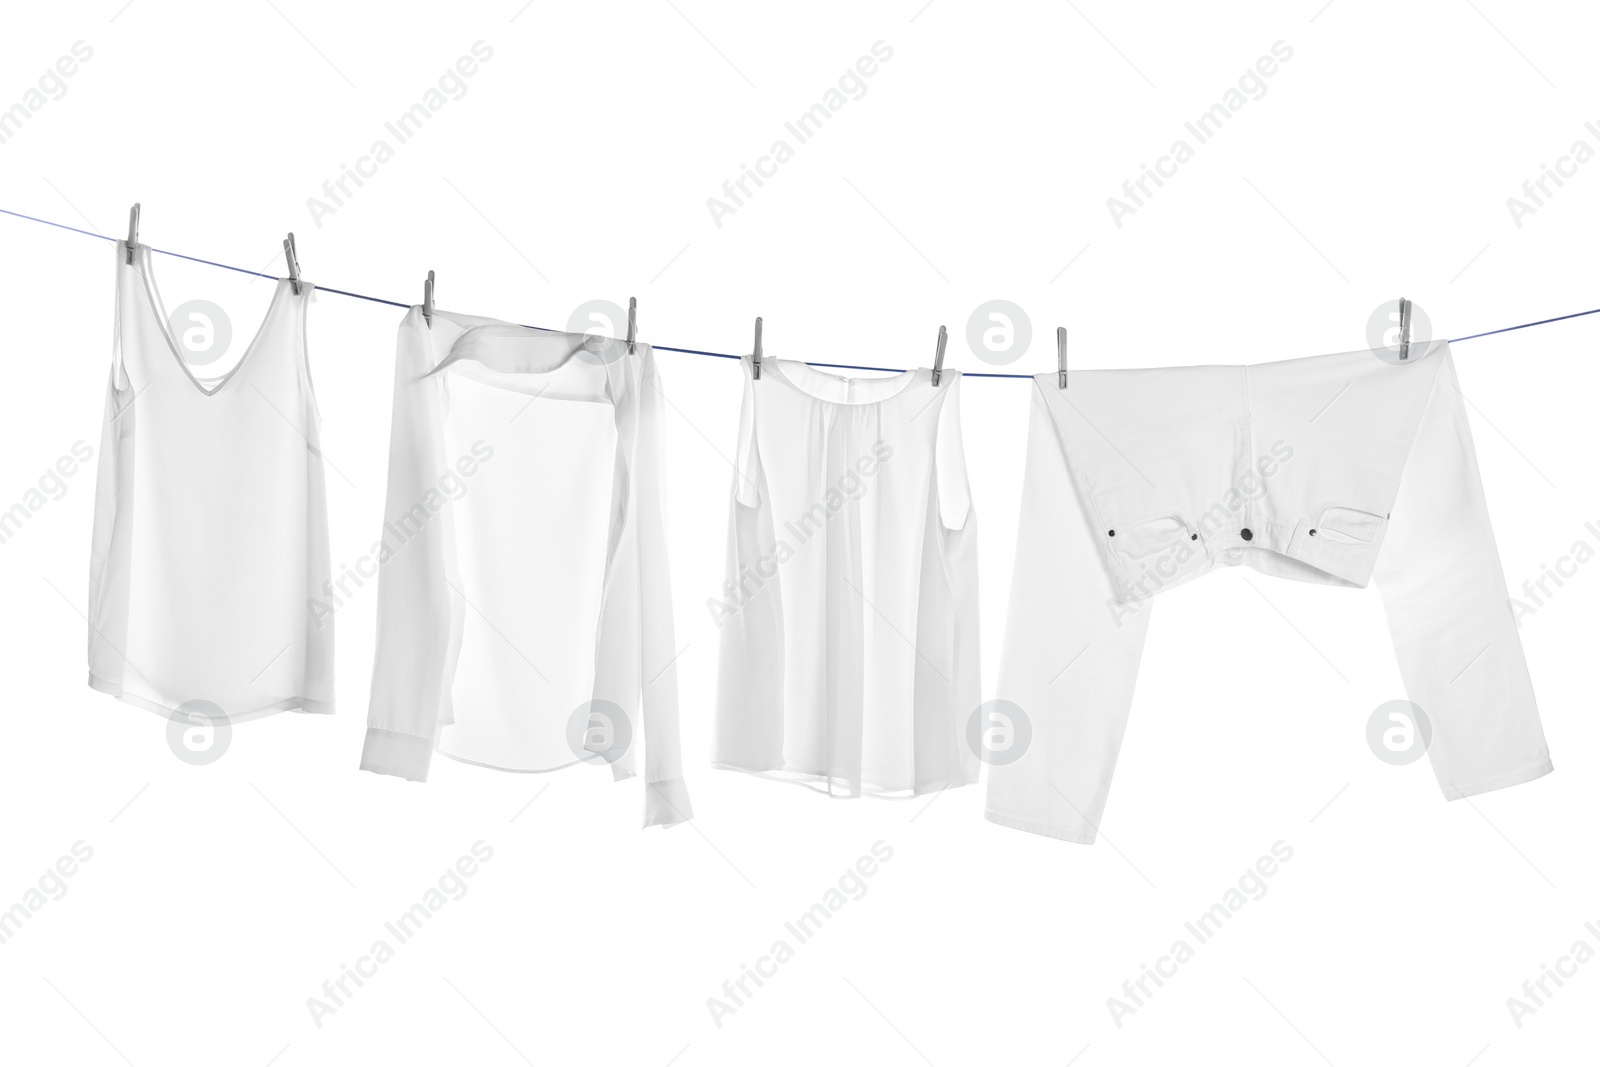 Photo of Different clothes drying on laundry line against white background